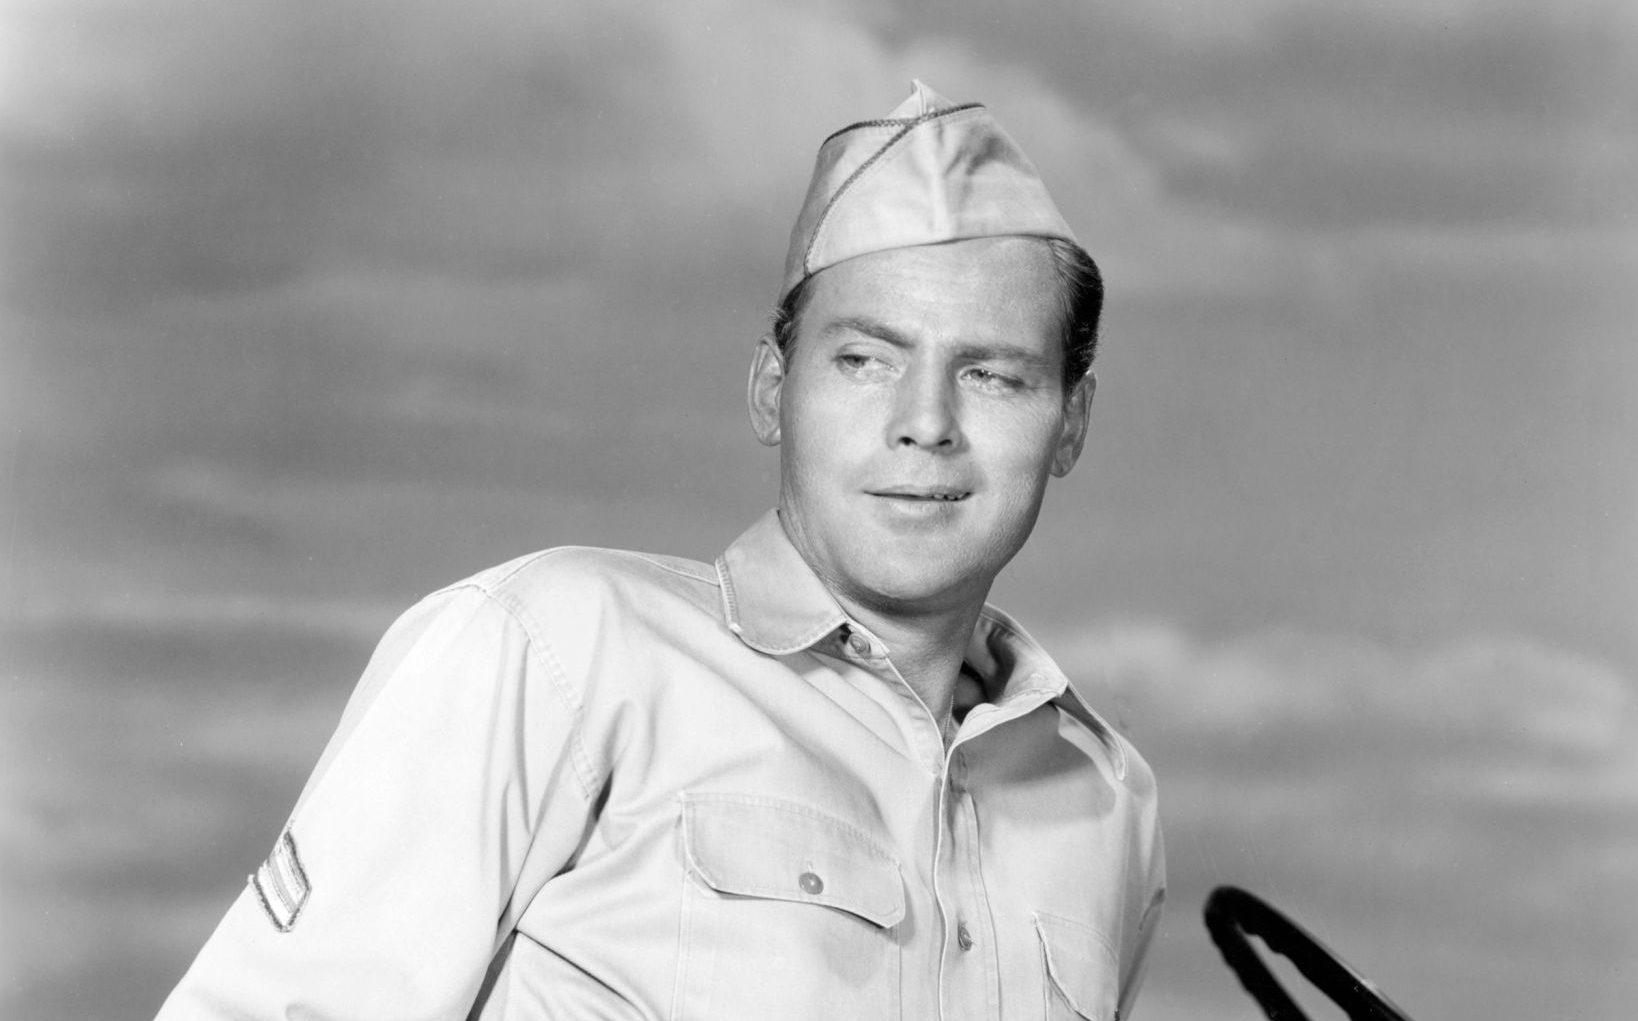 John Agar is the first husband of Shirley Temple 